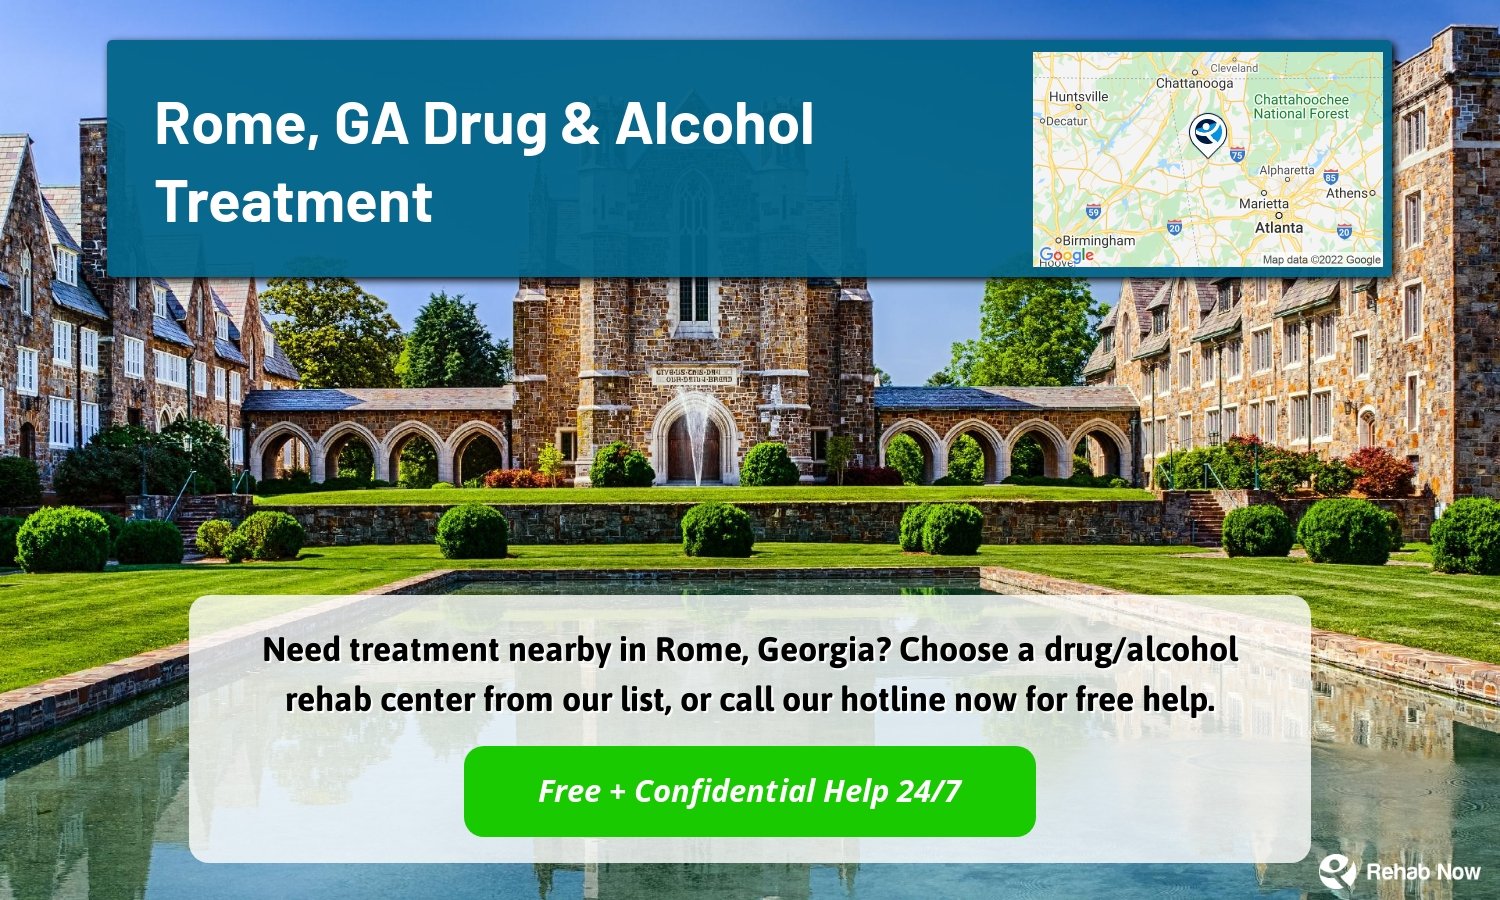 Need treatment nearby in Rome, Georgia? Choose a drug/alcohol rehab center from our list, or call our hotline now for free help.